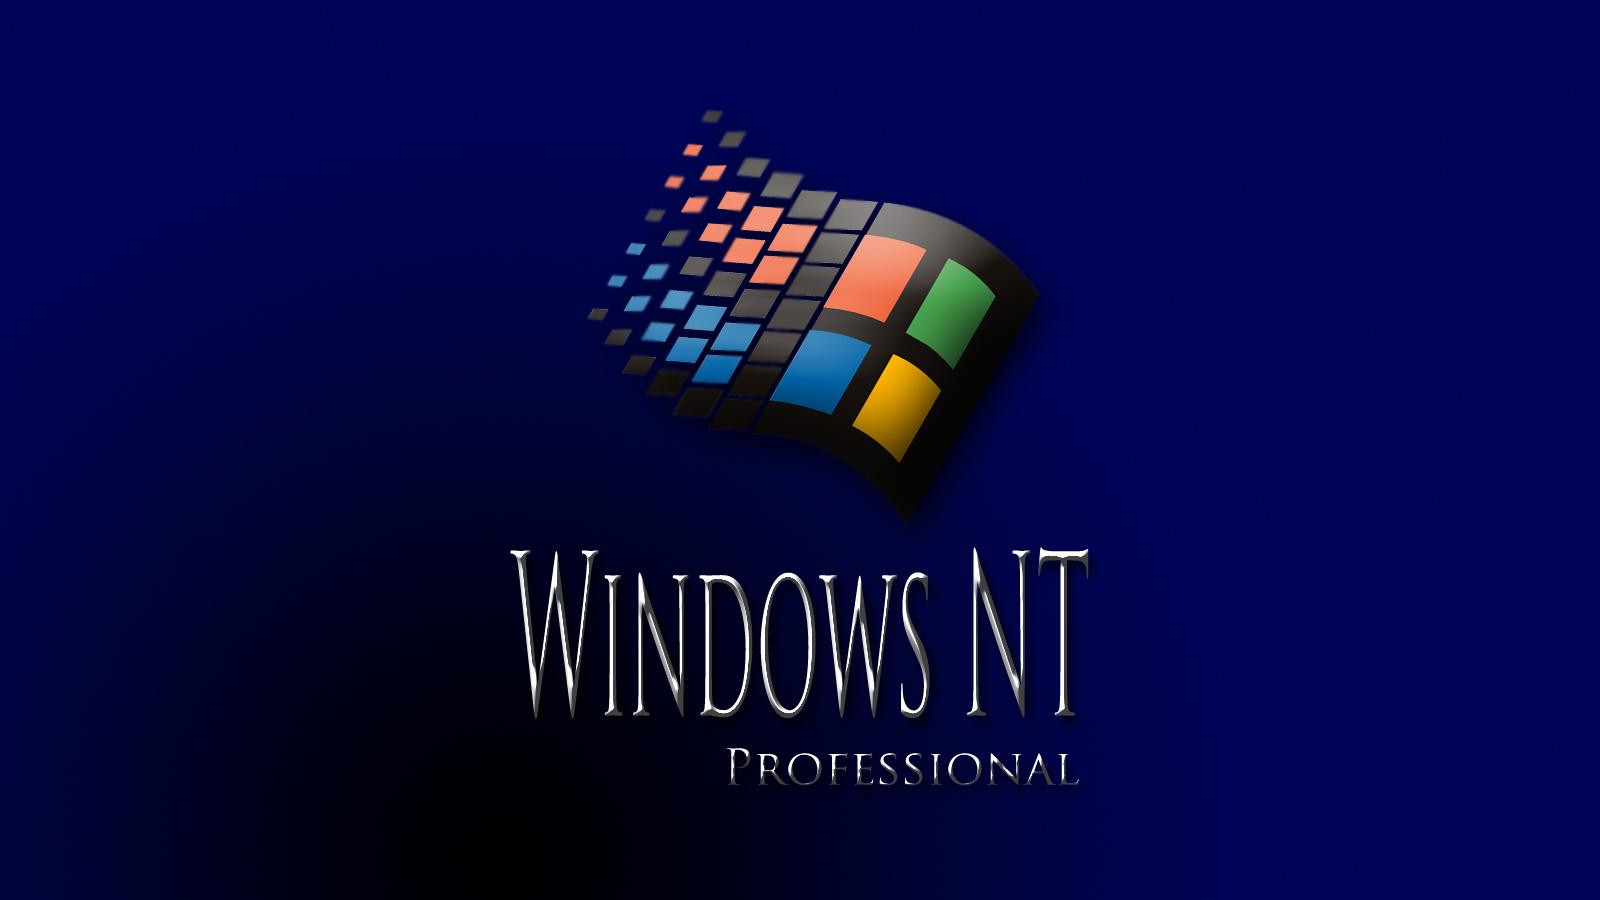 Windows Nt Wallpaper Image Gallery For Location